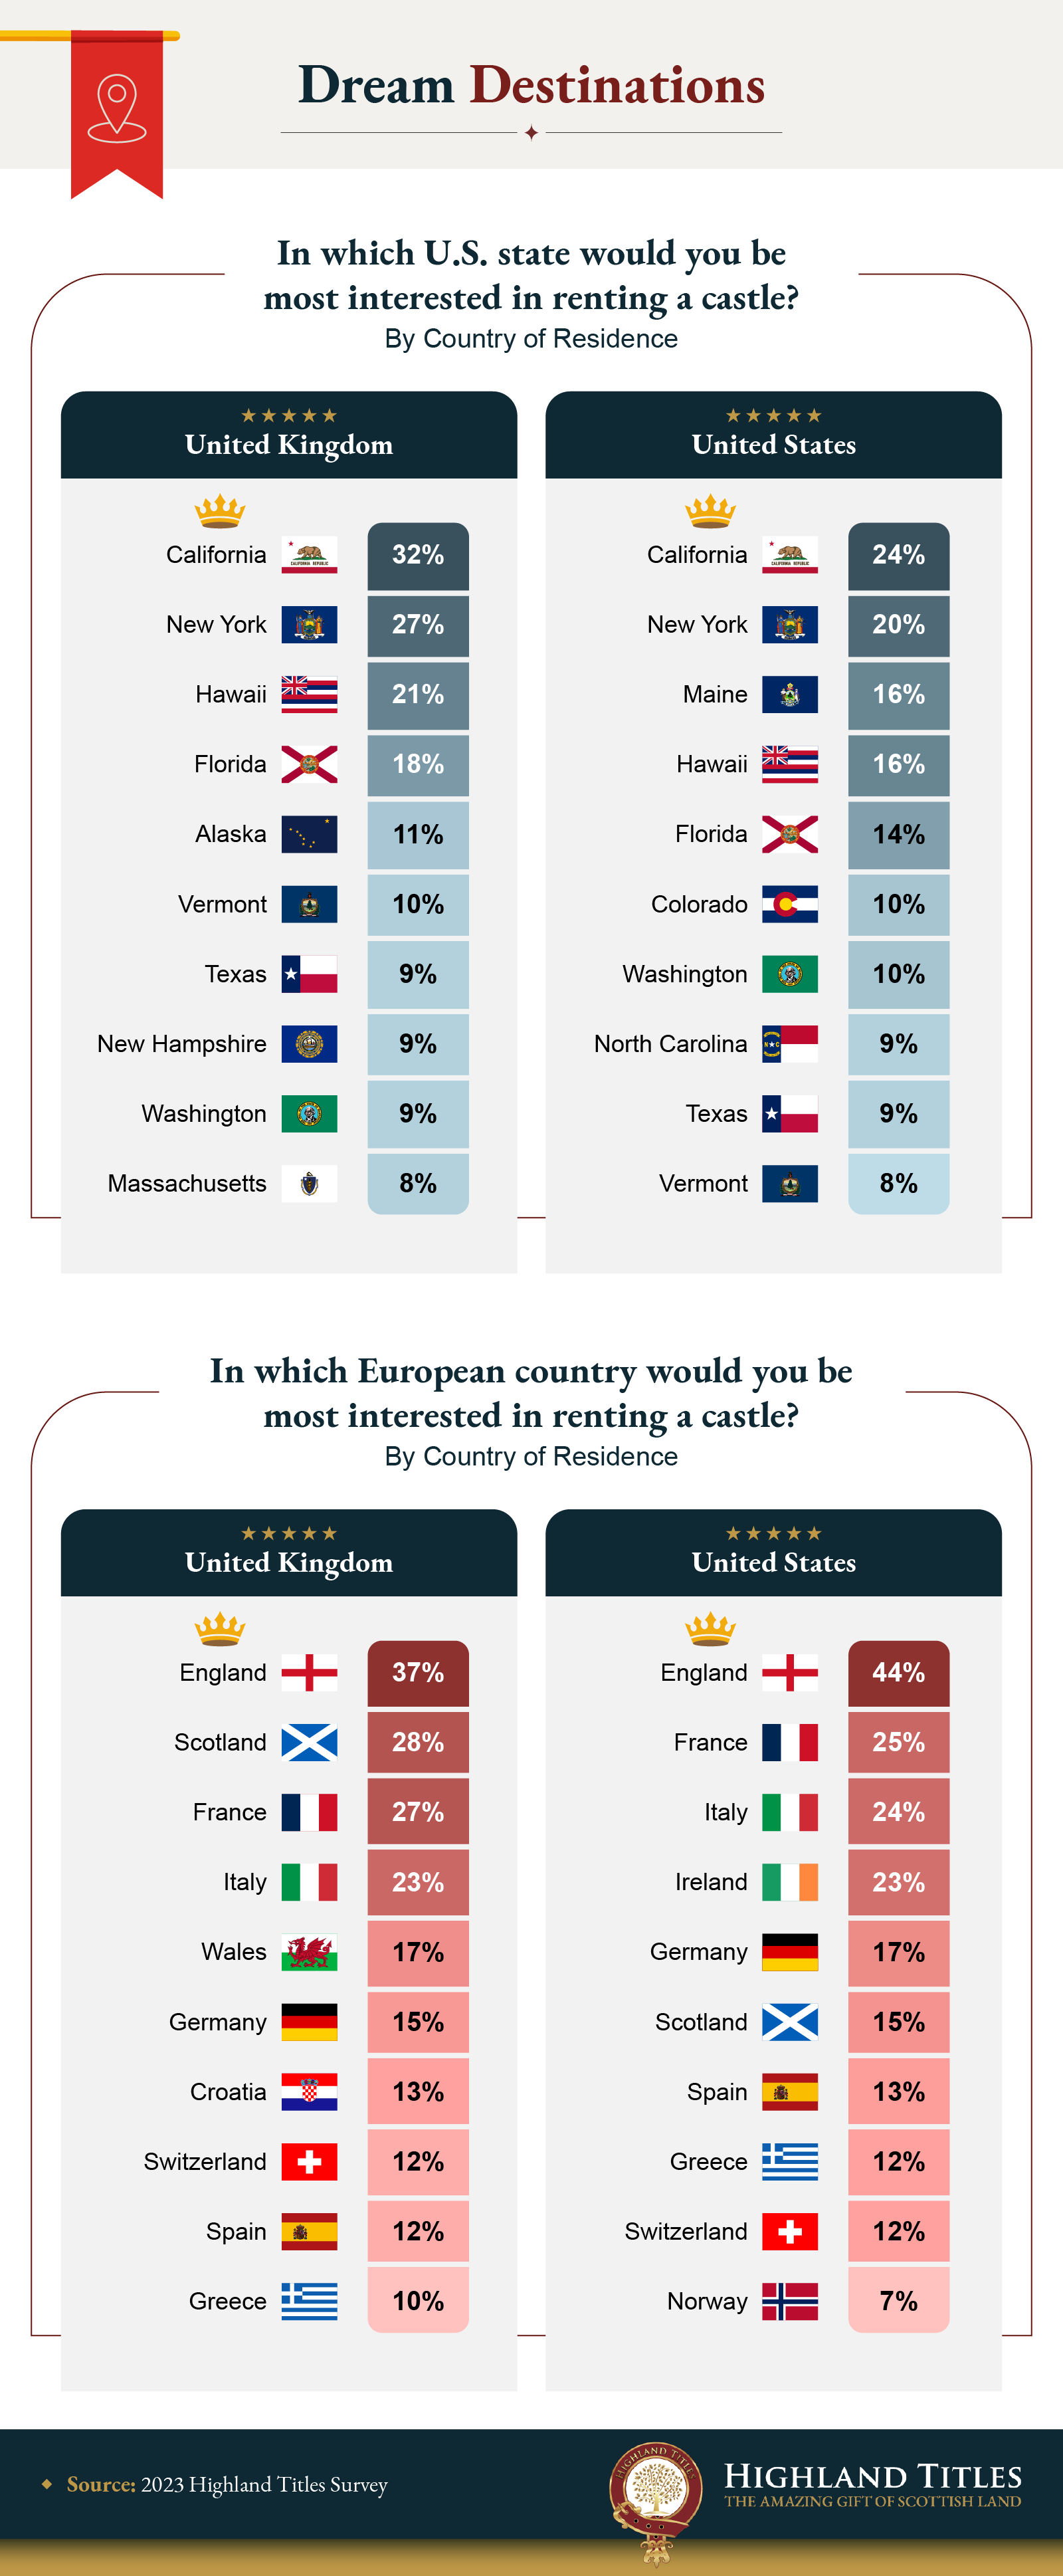 Infographic that explores which U.S states and European countries Americans are interested in renting a castle in